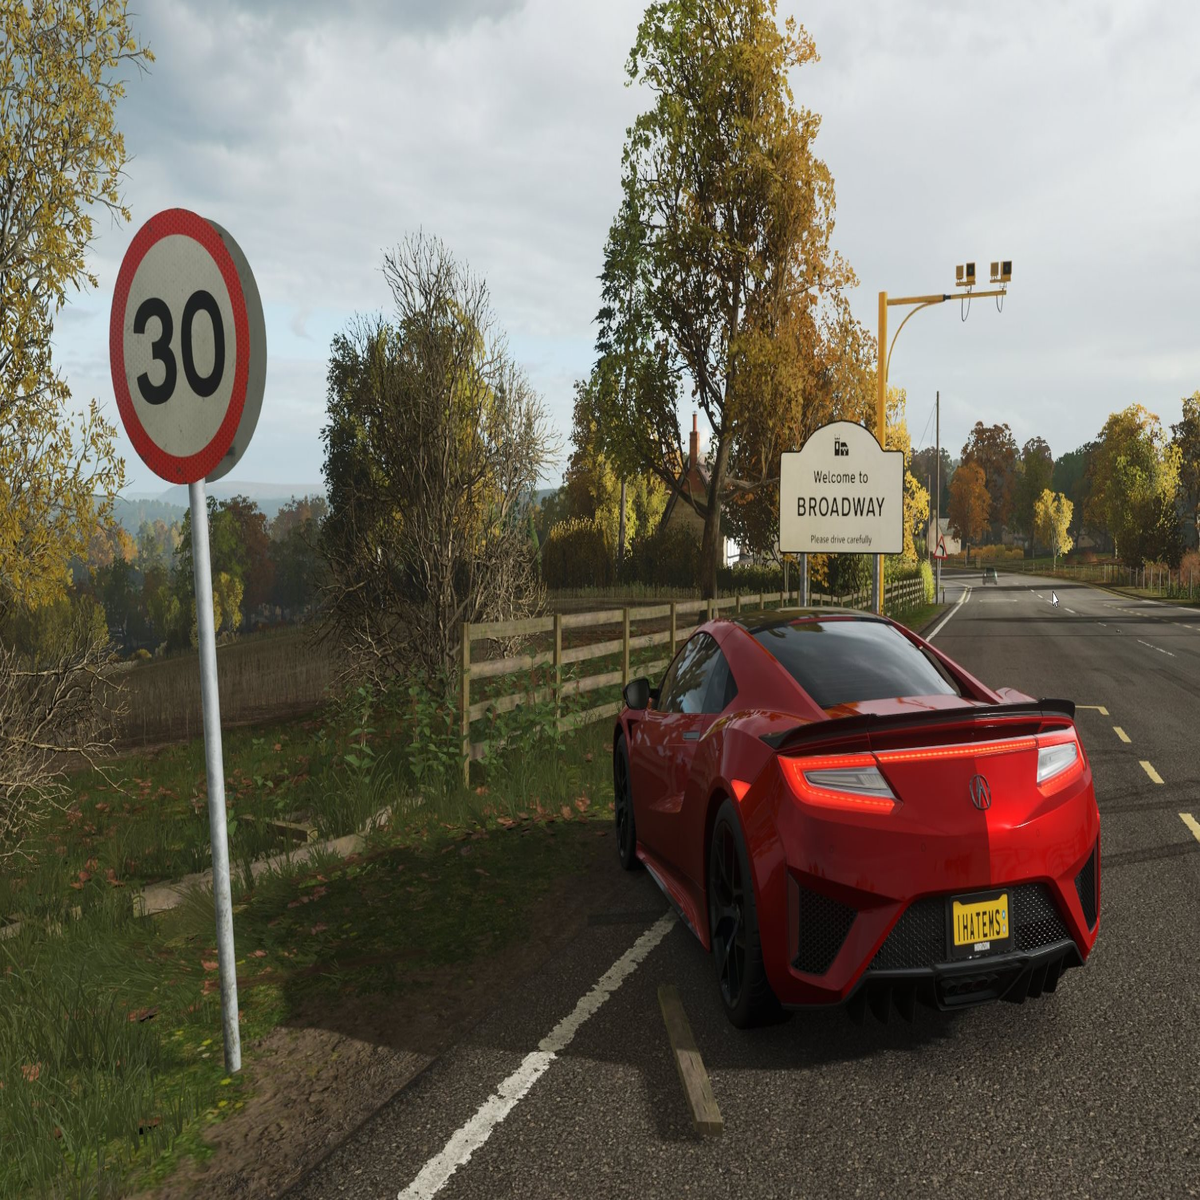 Forza Horizon 4 review – the best racing experience, in an ideal Britain, Games